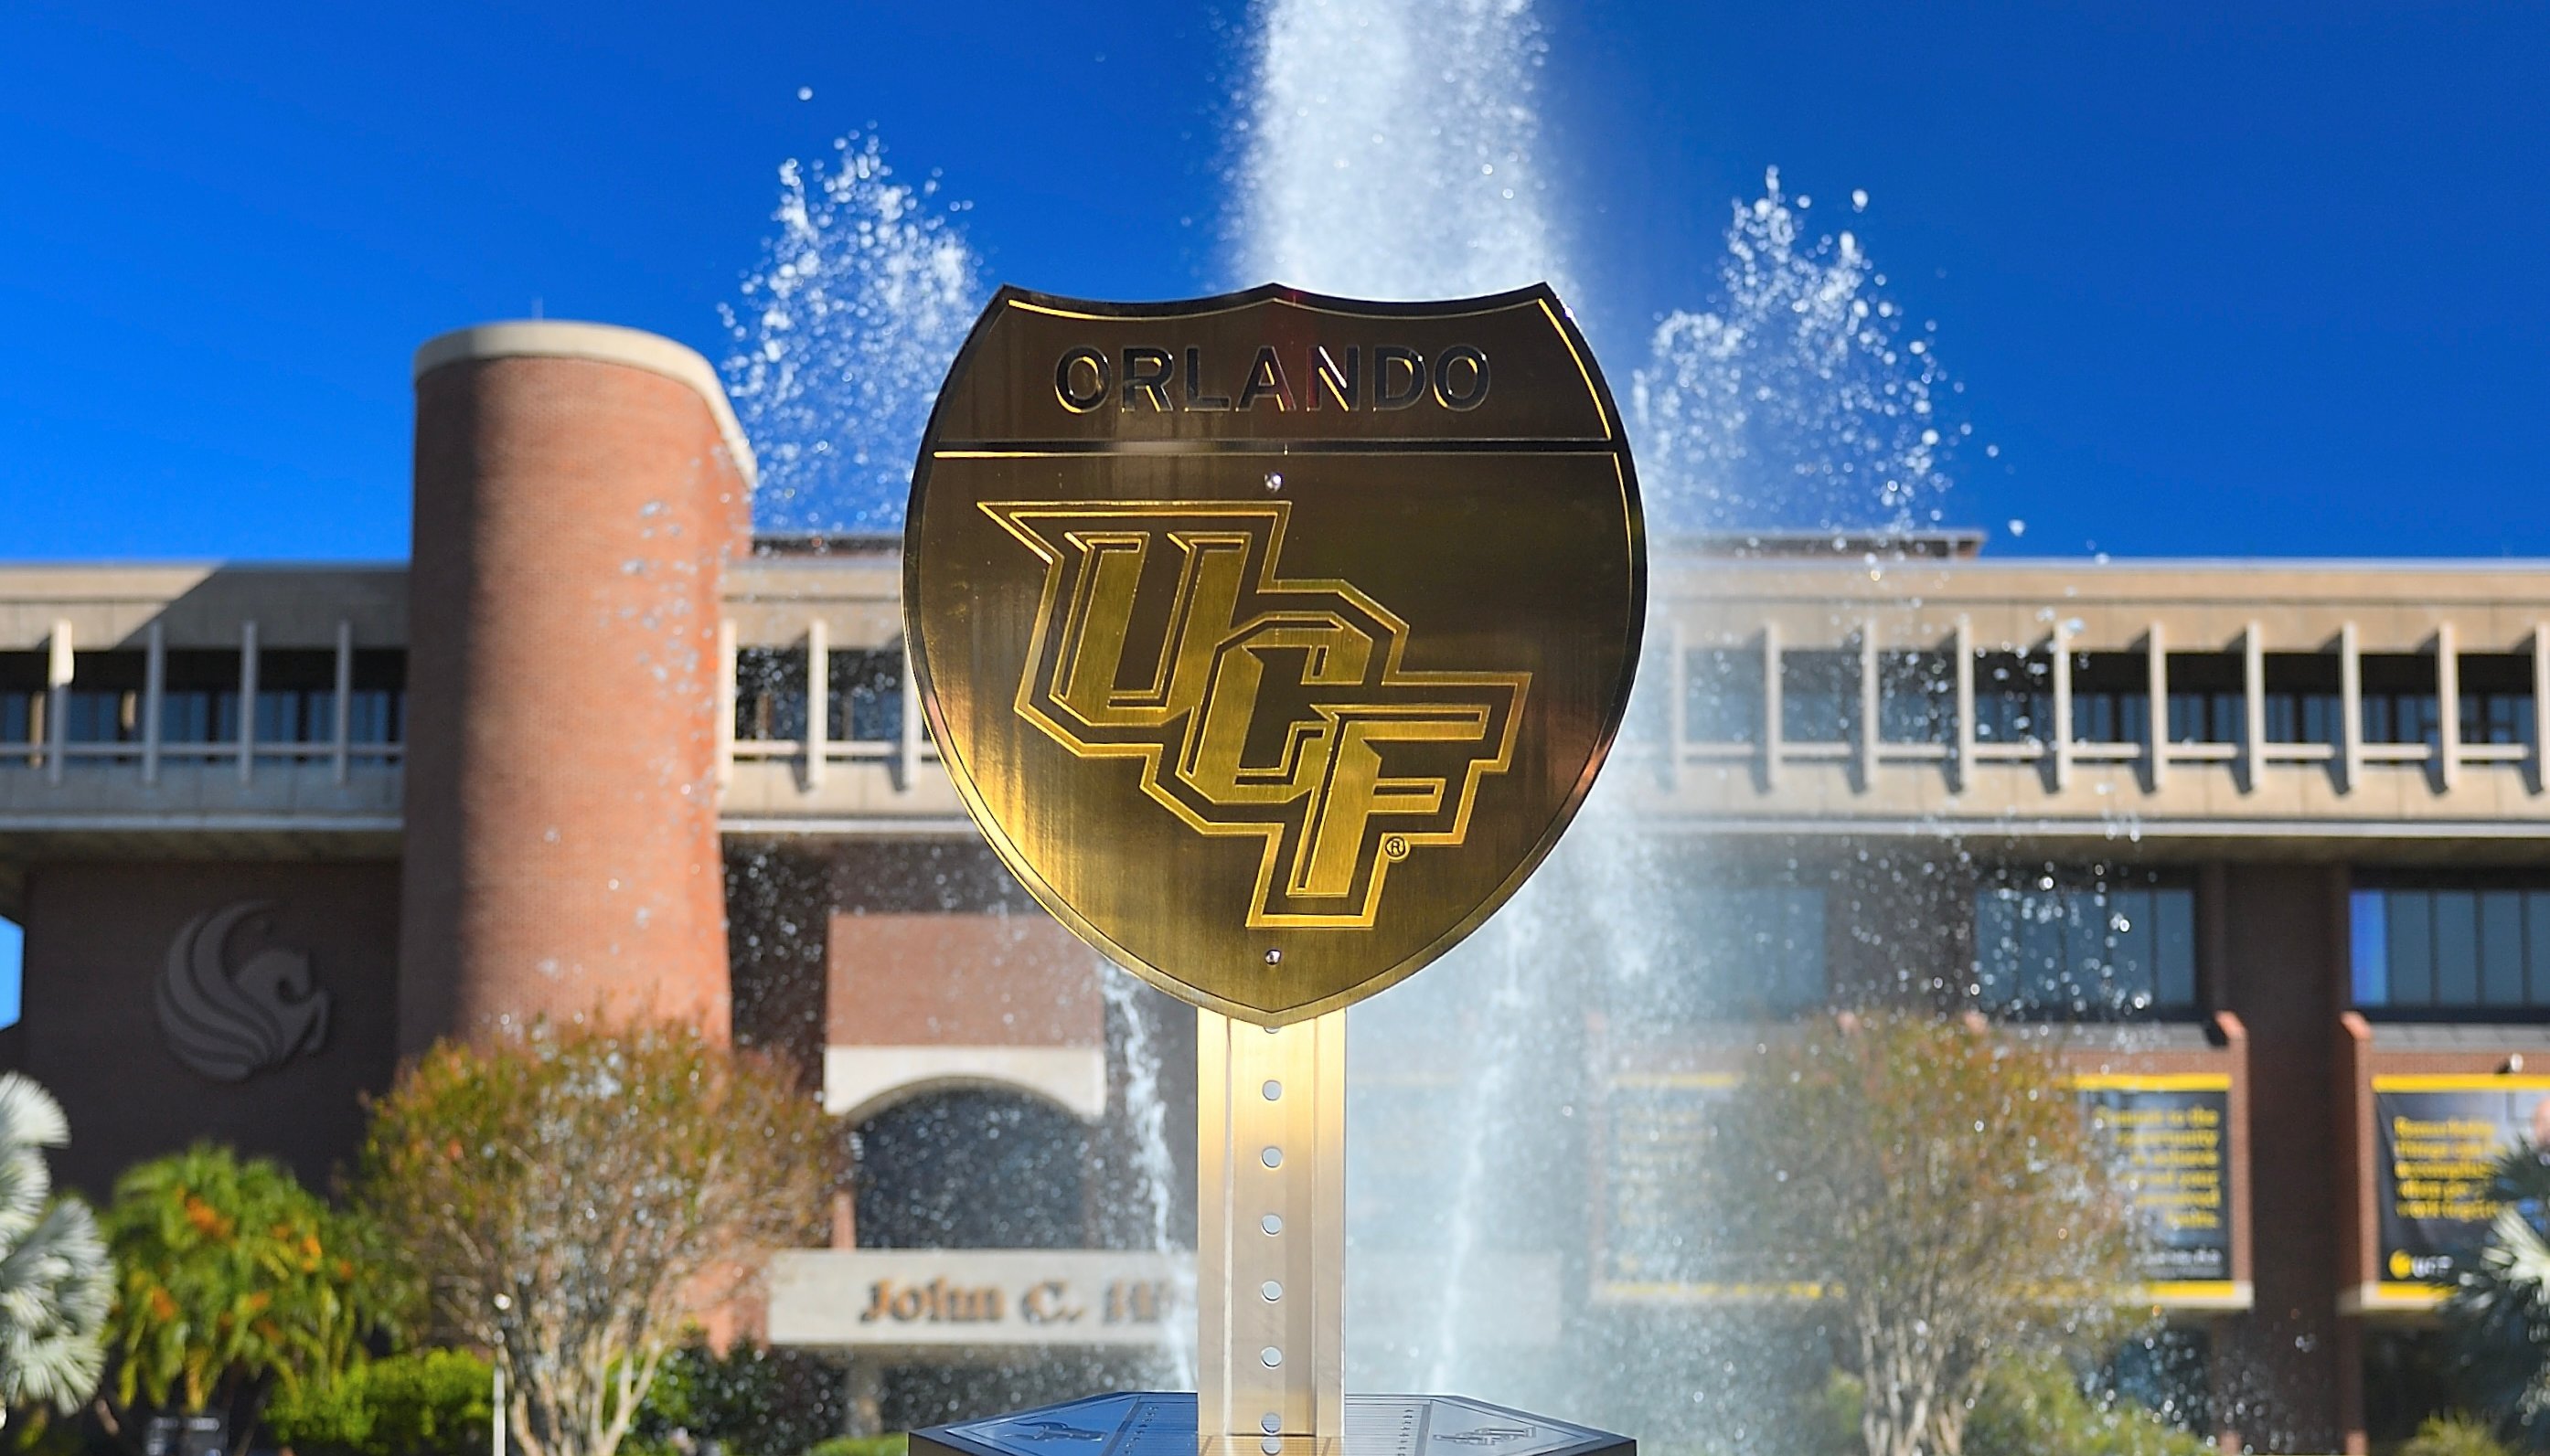 Read UCF Rivalries: The Old and New by UCF Knights